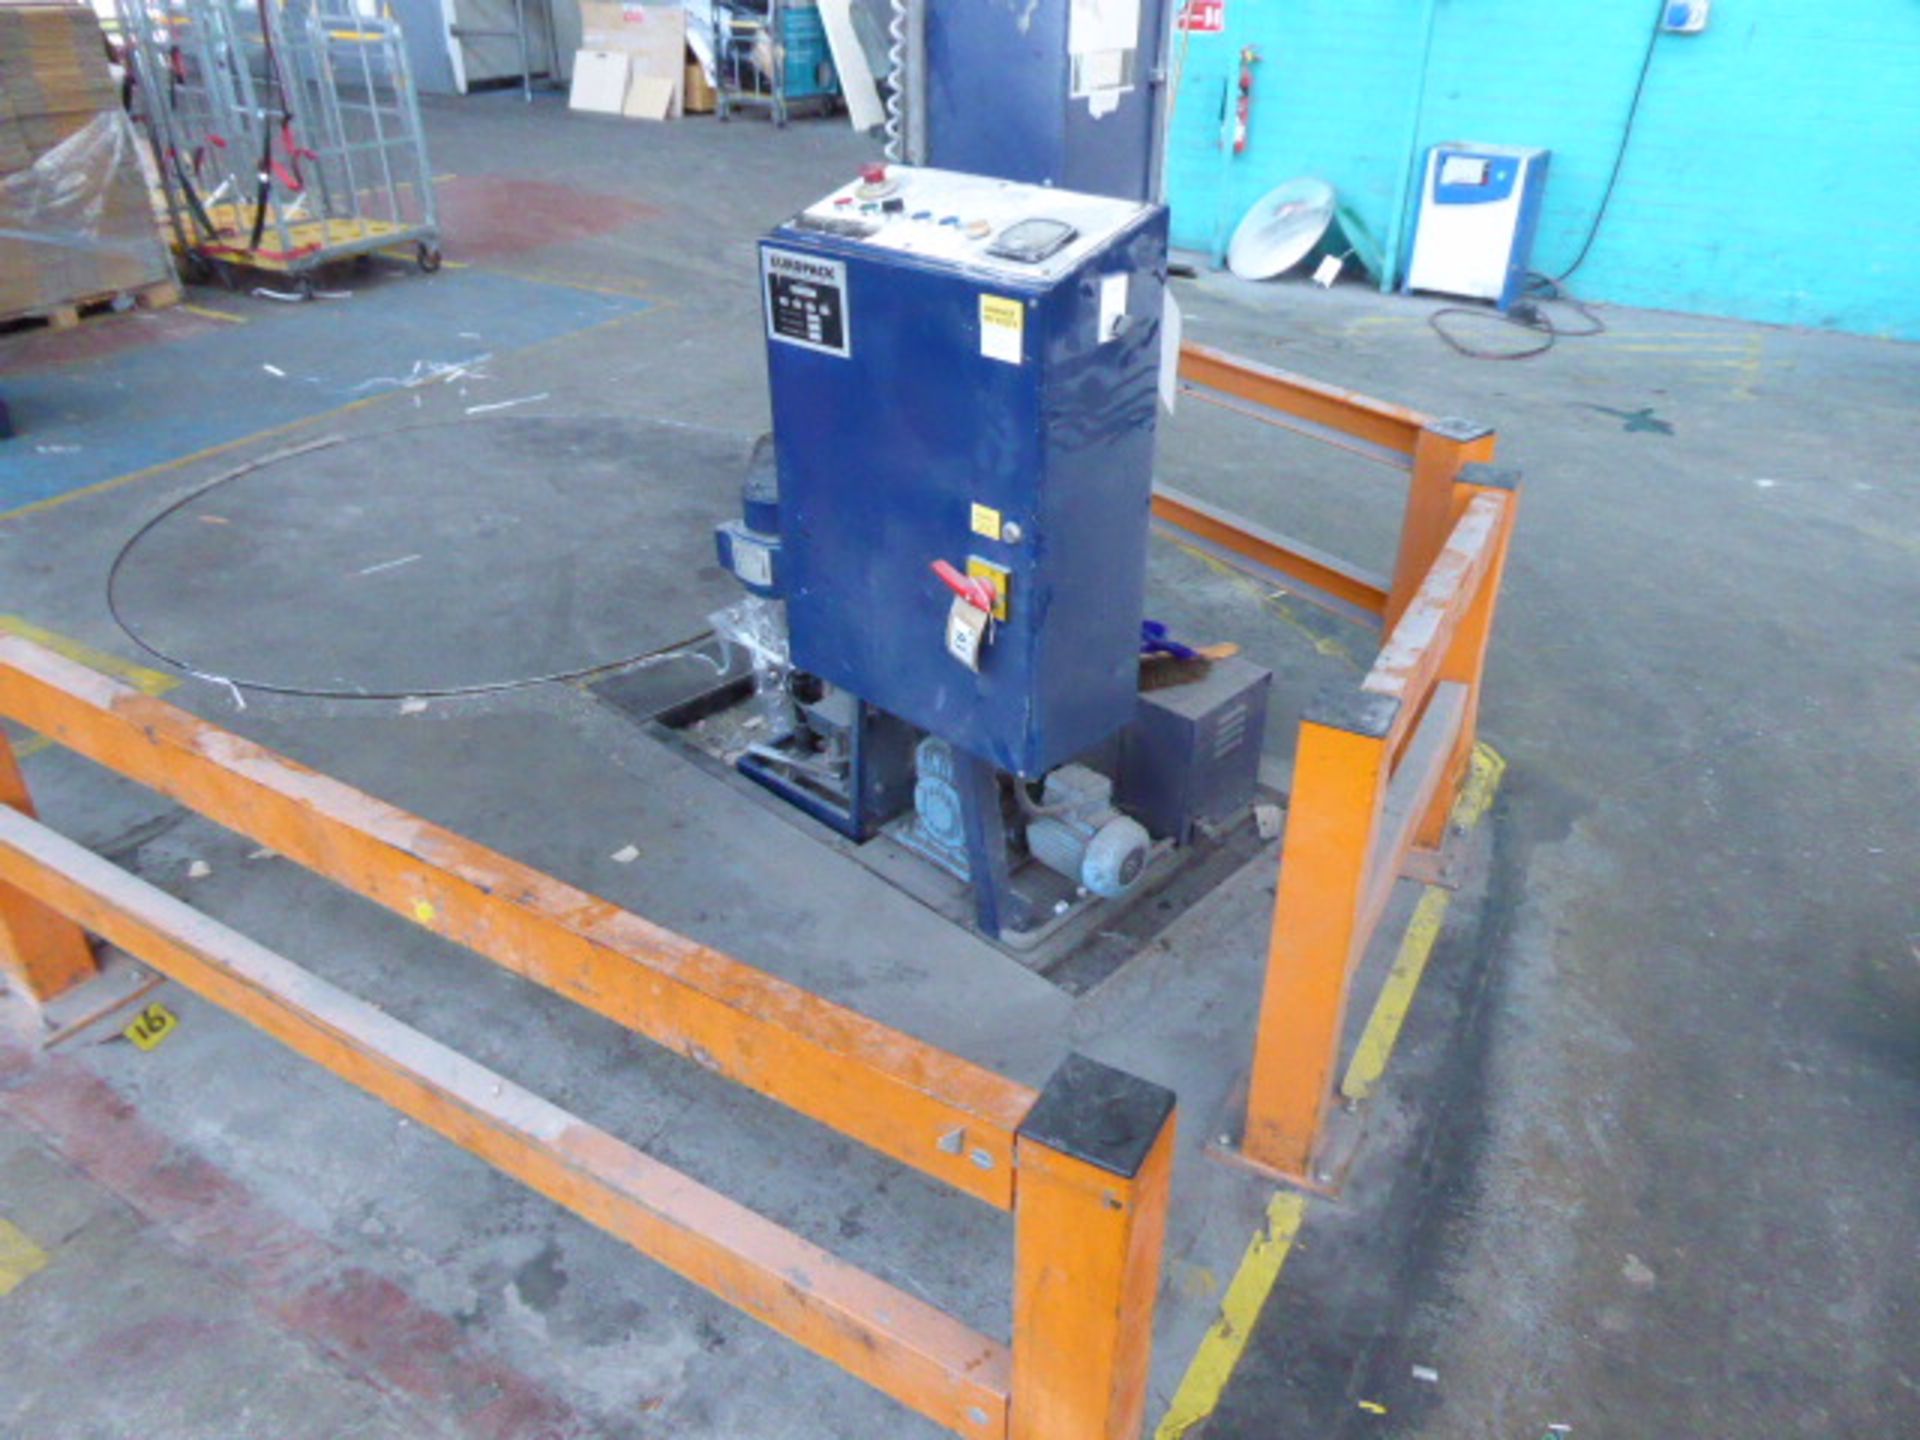 Europack pallet wrapping machine, three phase electric together with 4 sections of safety fencing - Image 7 of 8